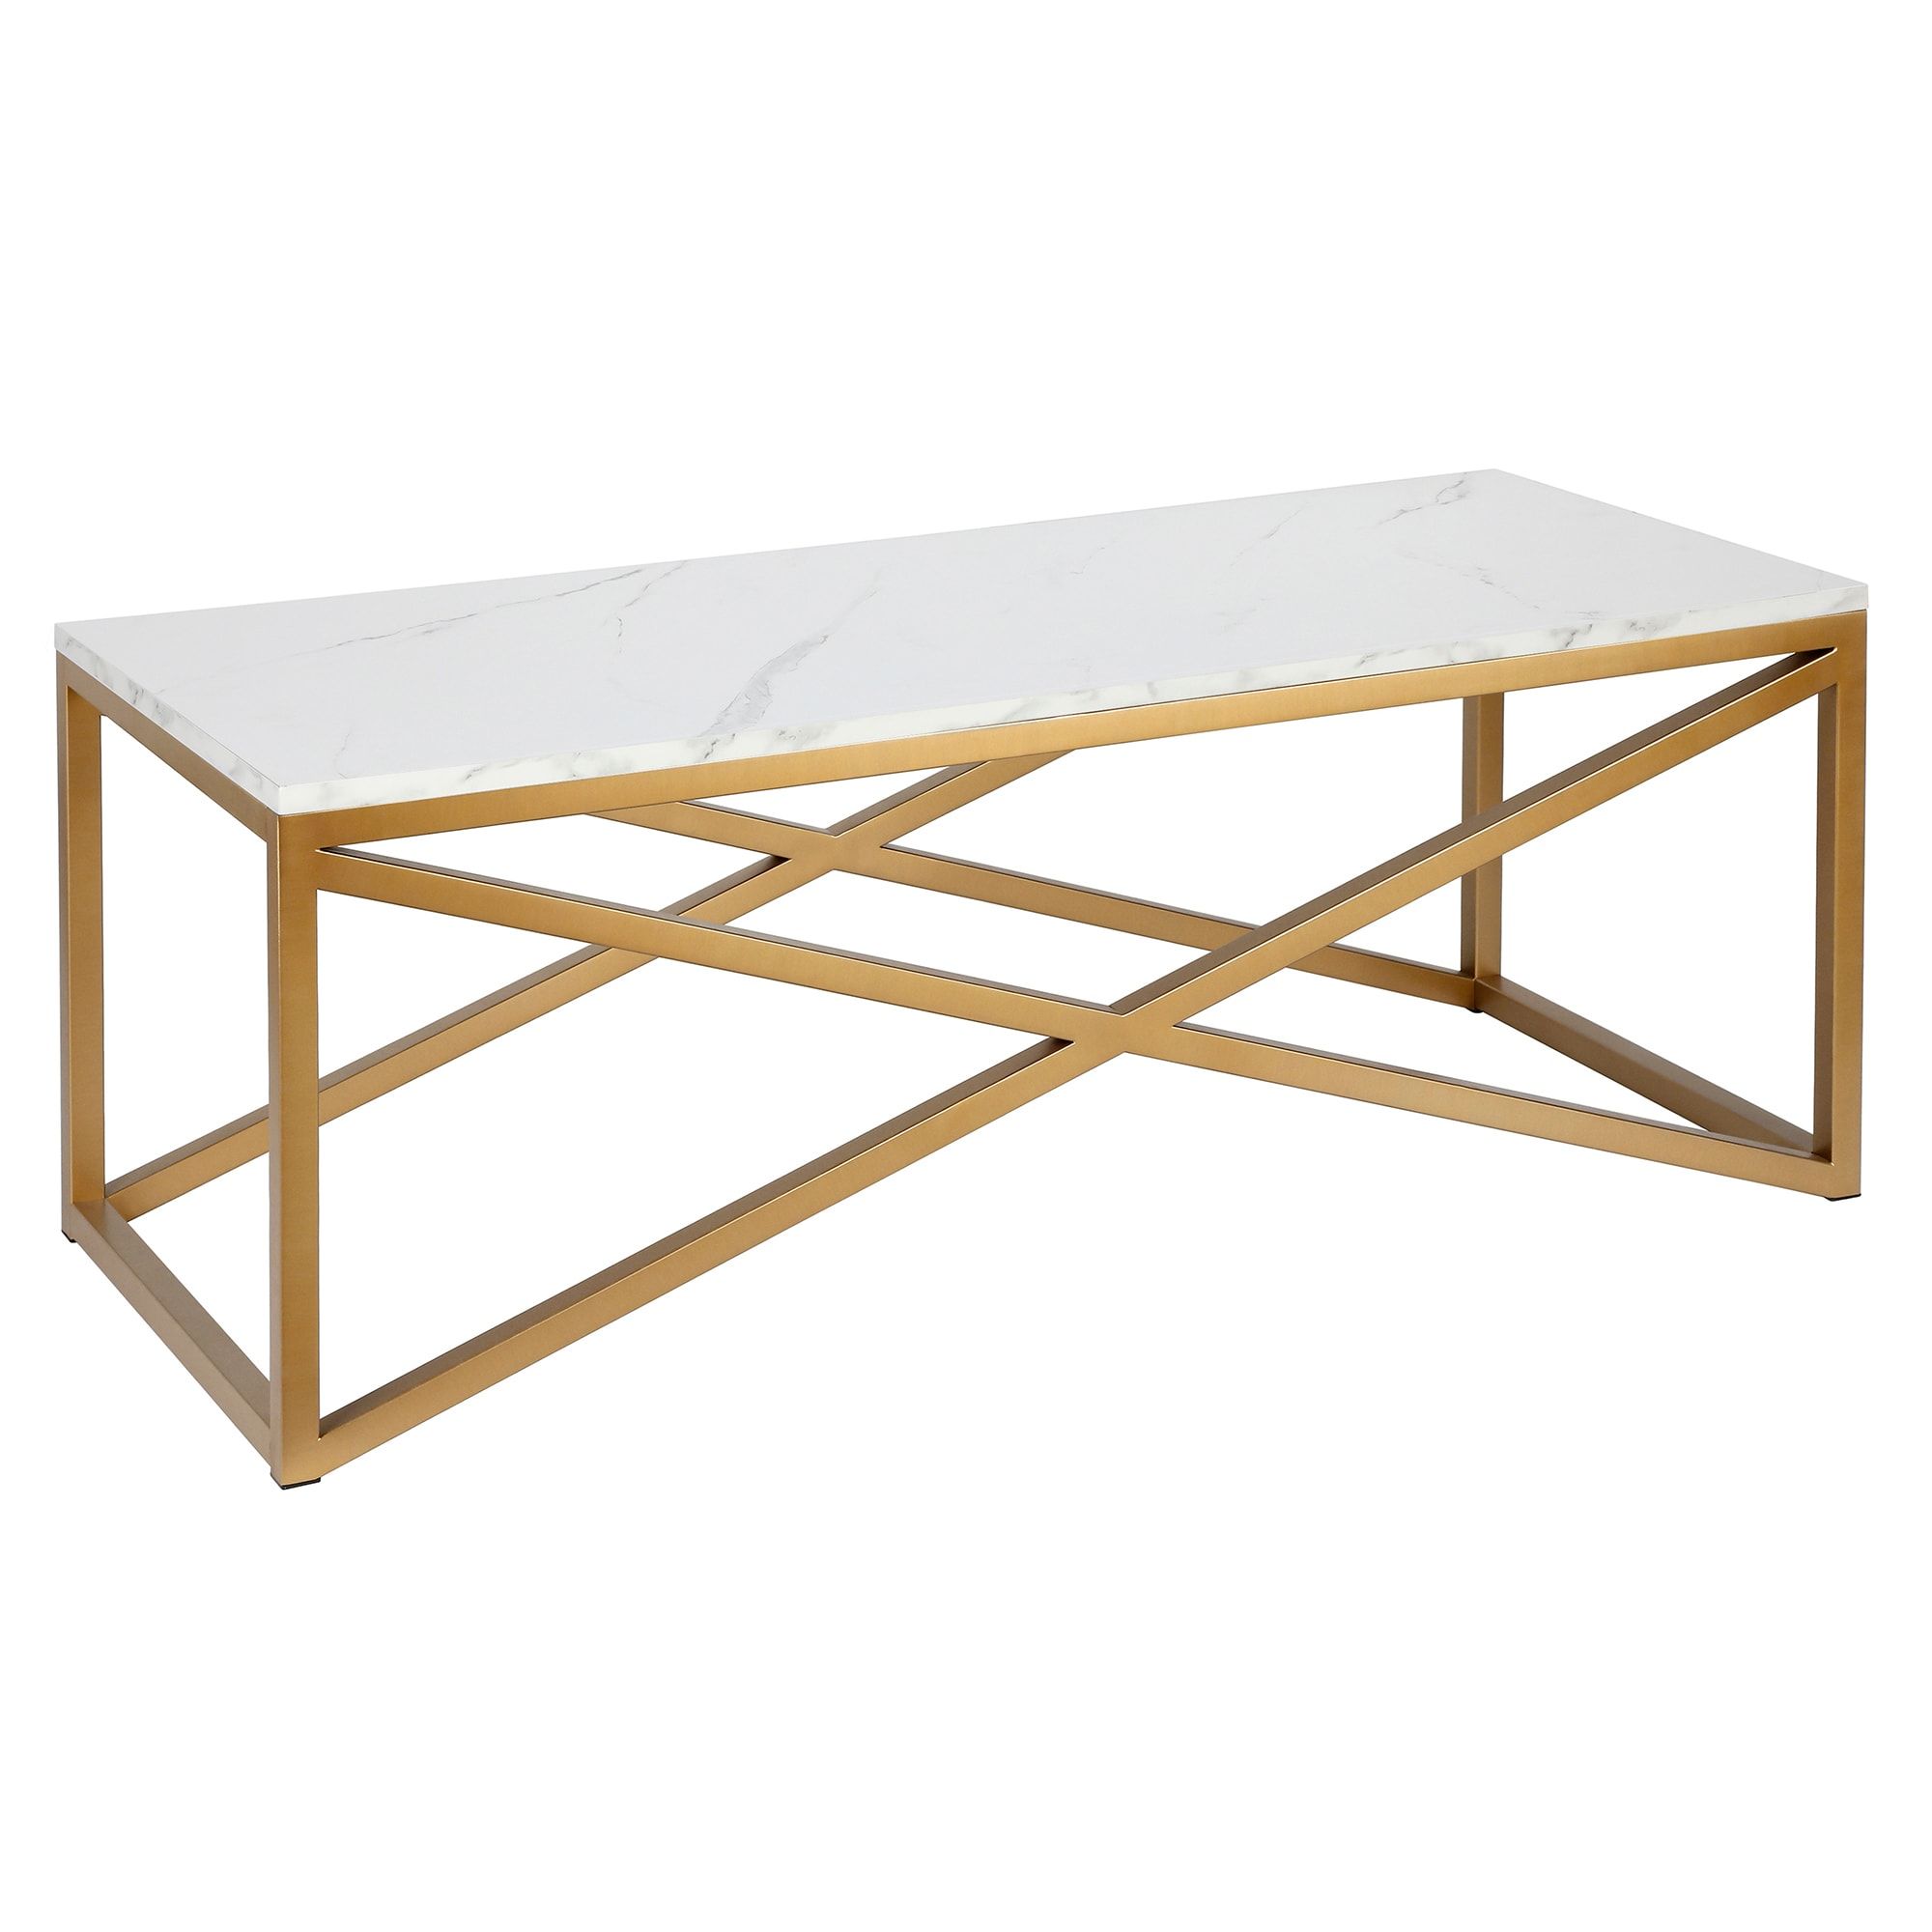 Calix Metal Coffee Tables At Lowes For Addison&amp;lane Calix Square Tables (View 4 of 20)